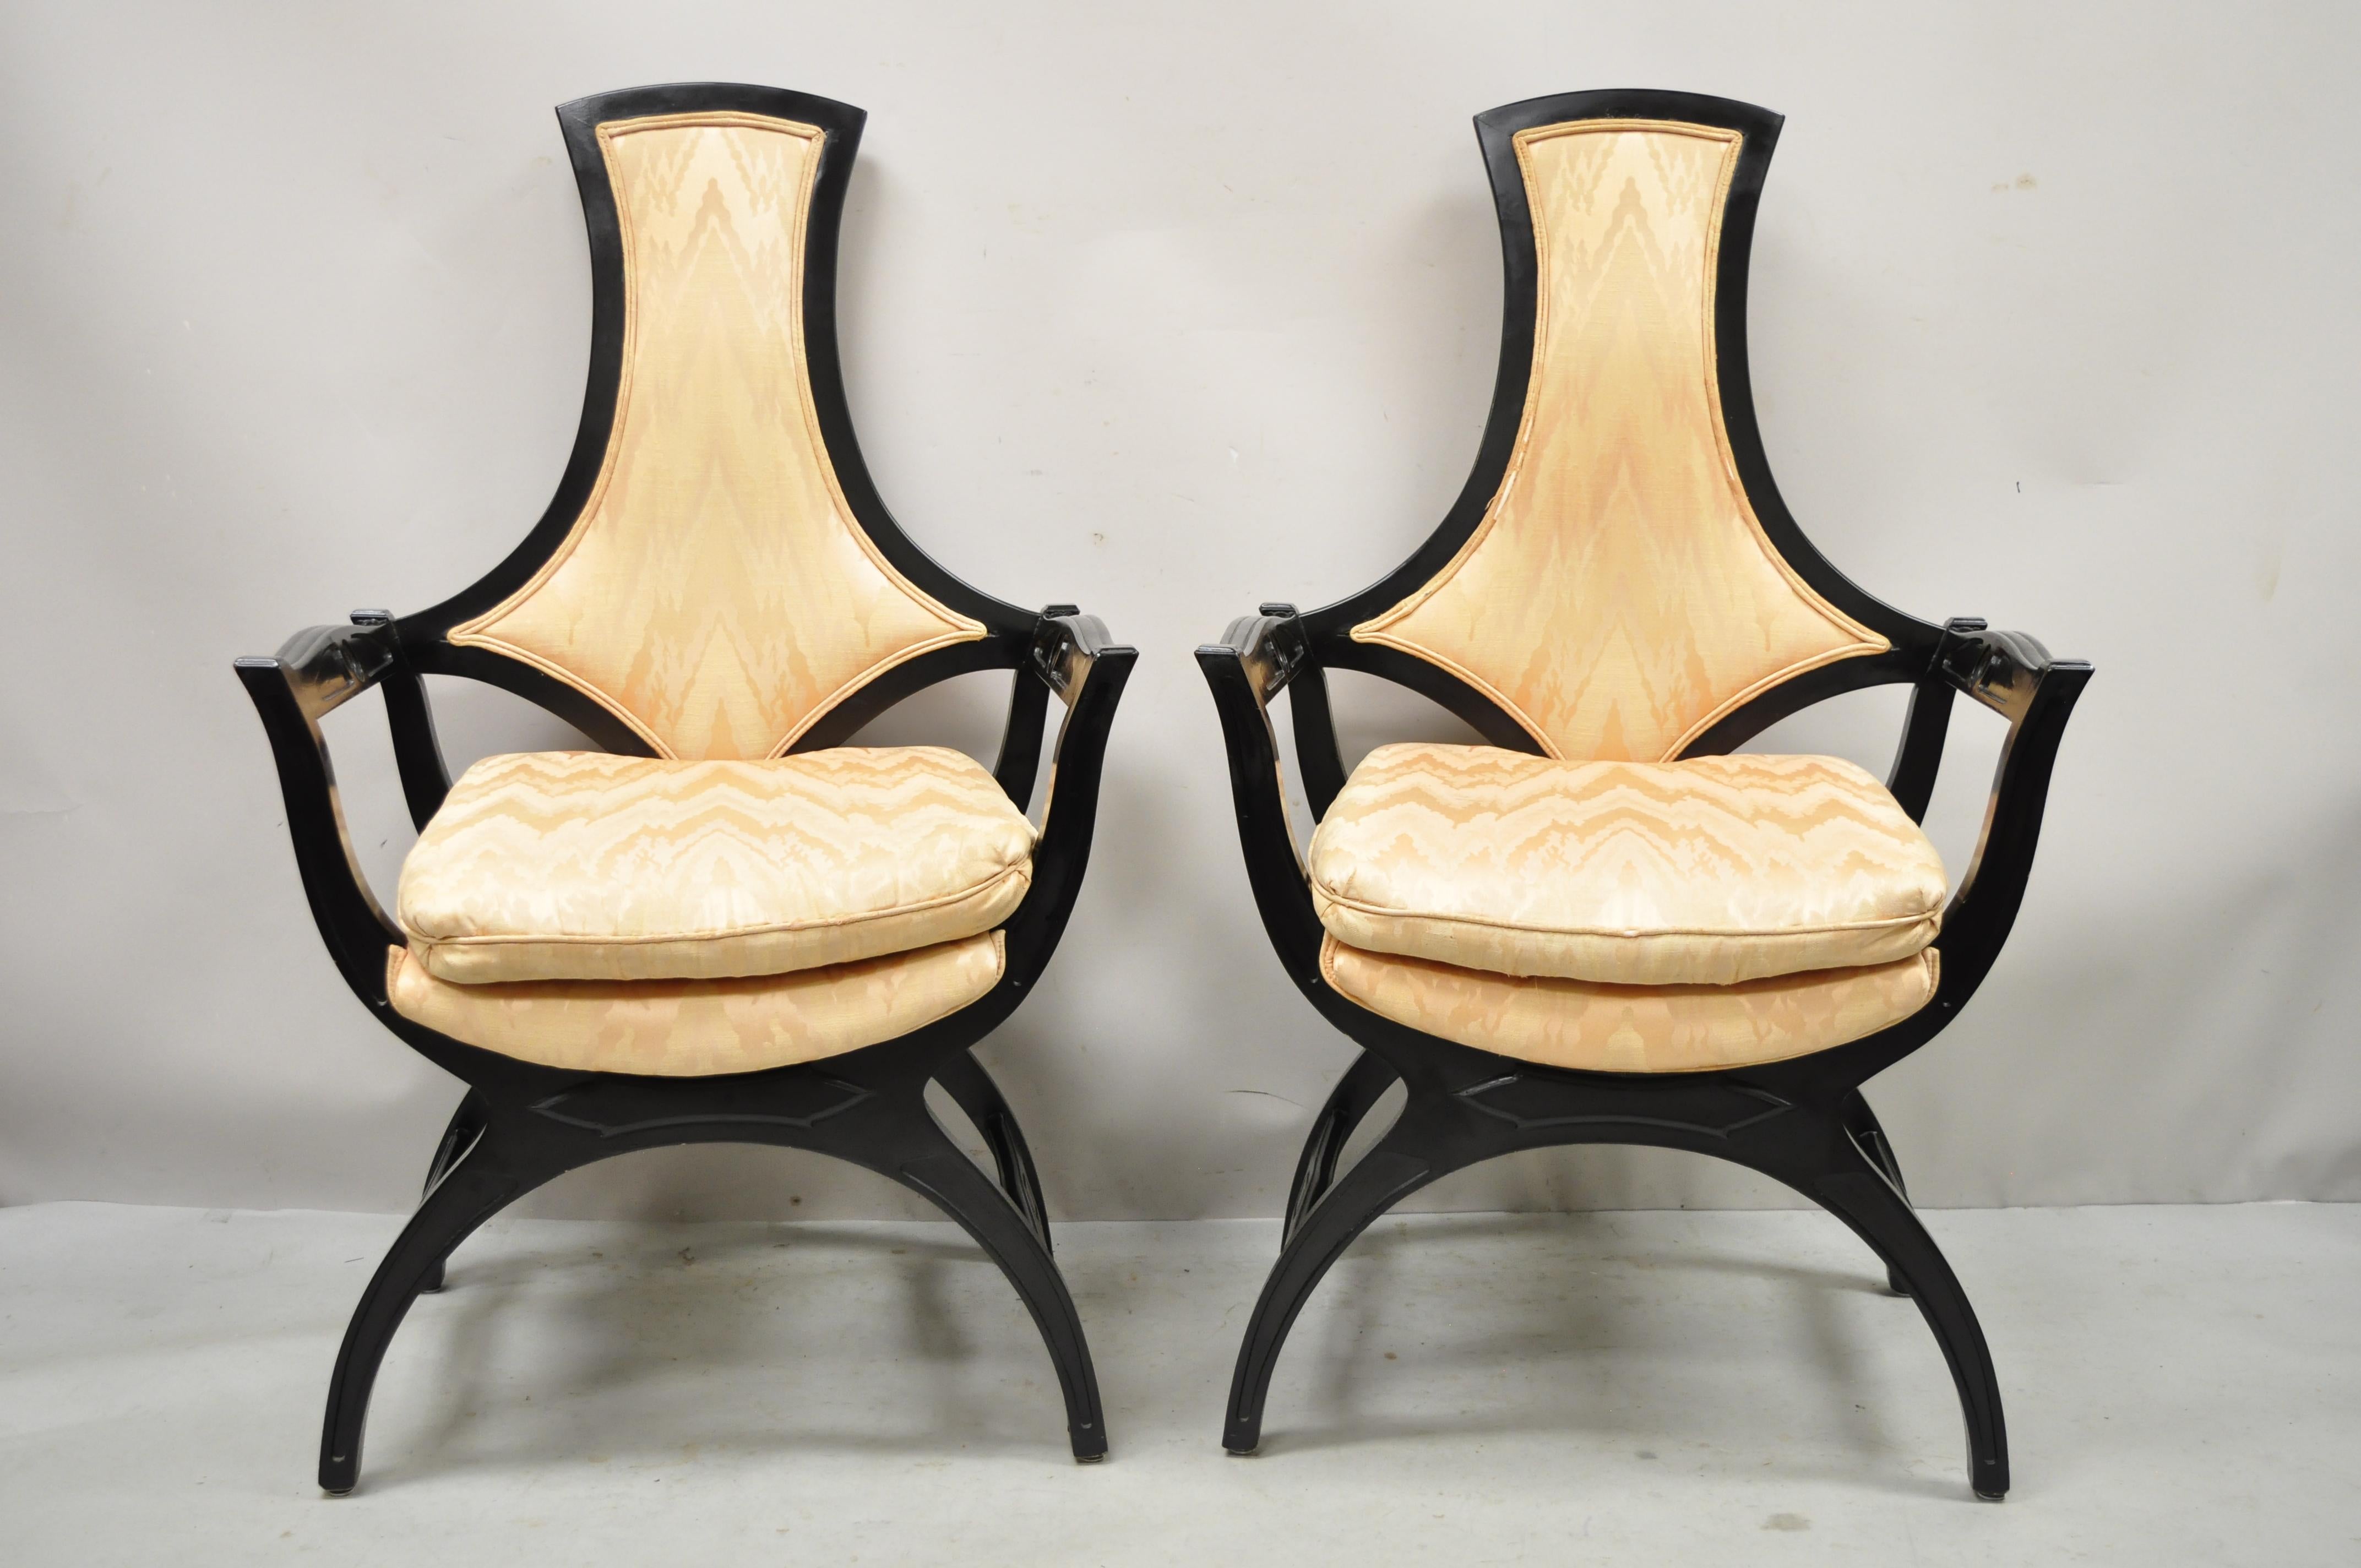 Vintage Hollywood Regency black Curule frame upholstered lounge arm chairs- pair. Item features black finish, curule form base, shaped backrest, solid wood frames, very nice vintage pair, great style and form. Circa mid 20th century. Measurements: